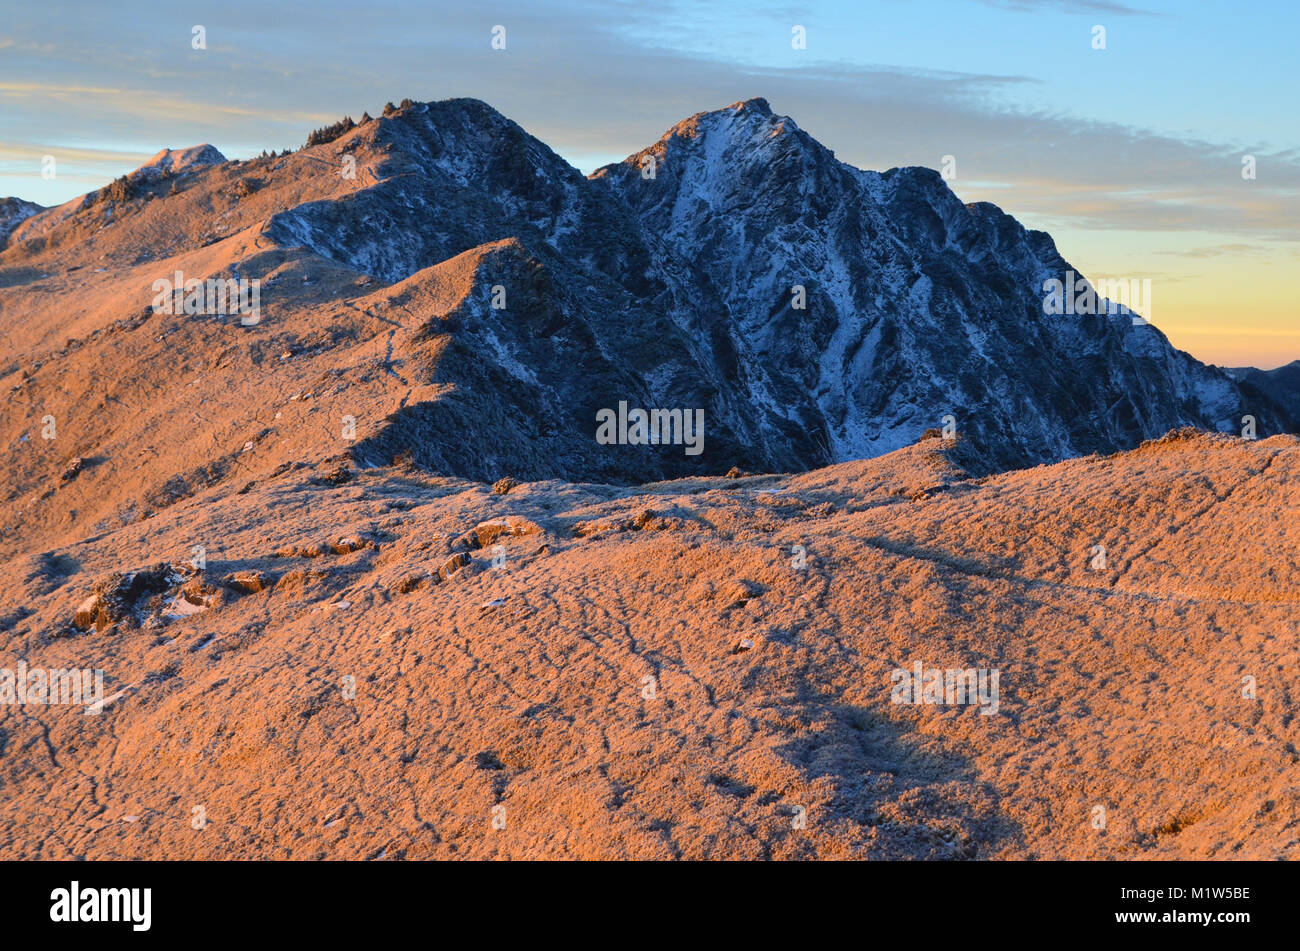 Snow and ice cover the highest peaks of Qilai mountains - Chilai Shan range, Taroko National park, northeastern Taiwan, in an early winter dawn Stock Photo